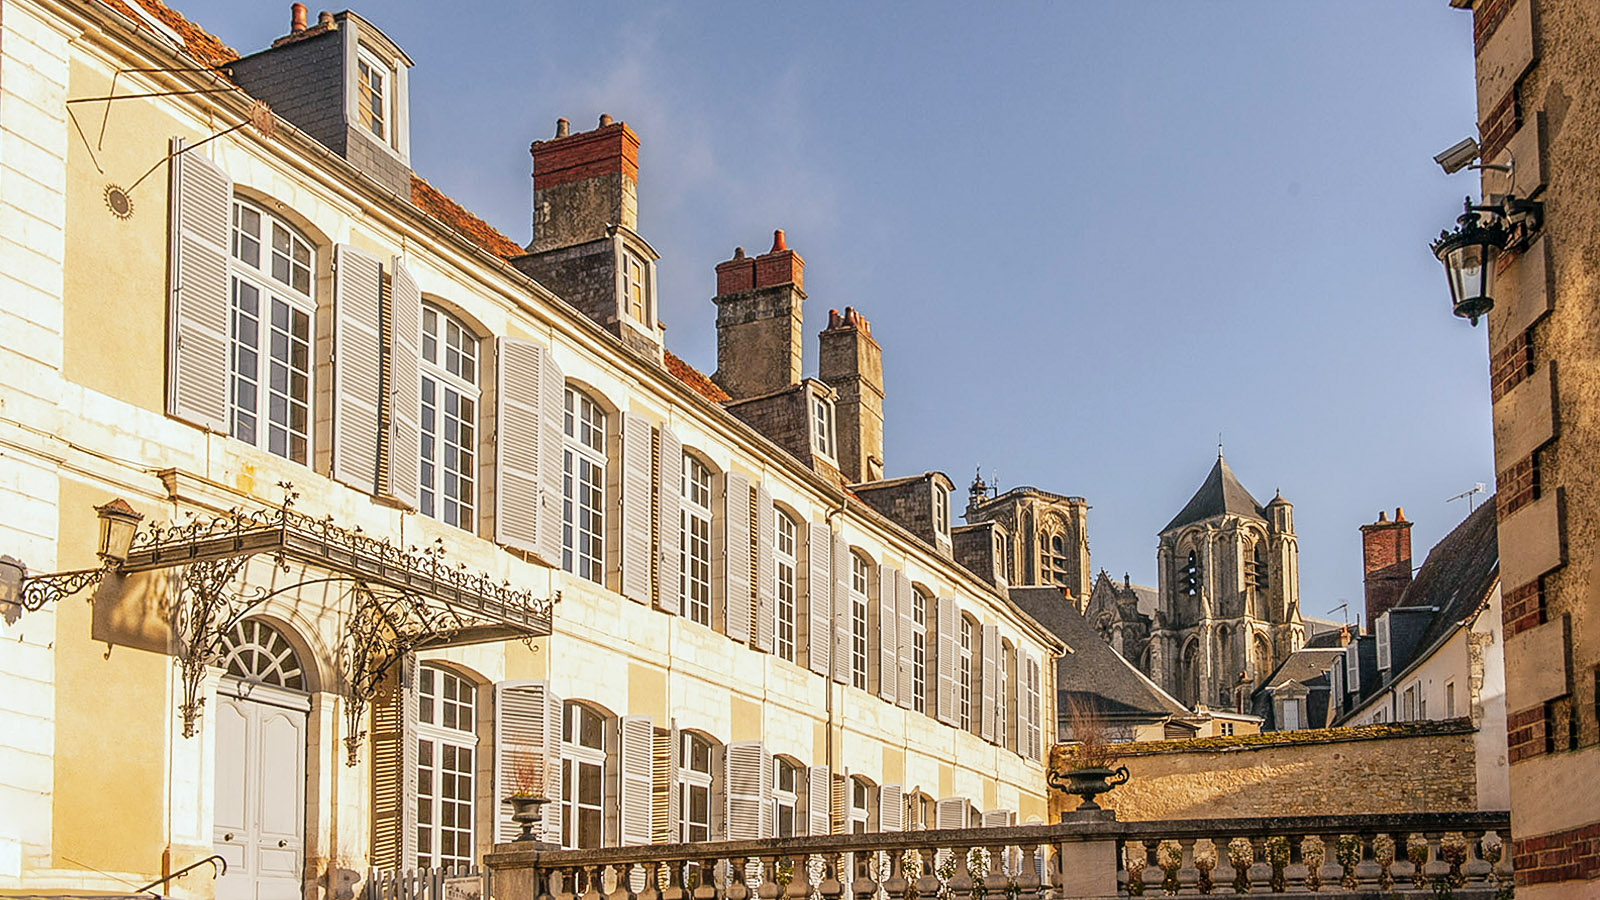 Chambres d'hotes in Bourges im Berry. Foto: Hilke Maunder